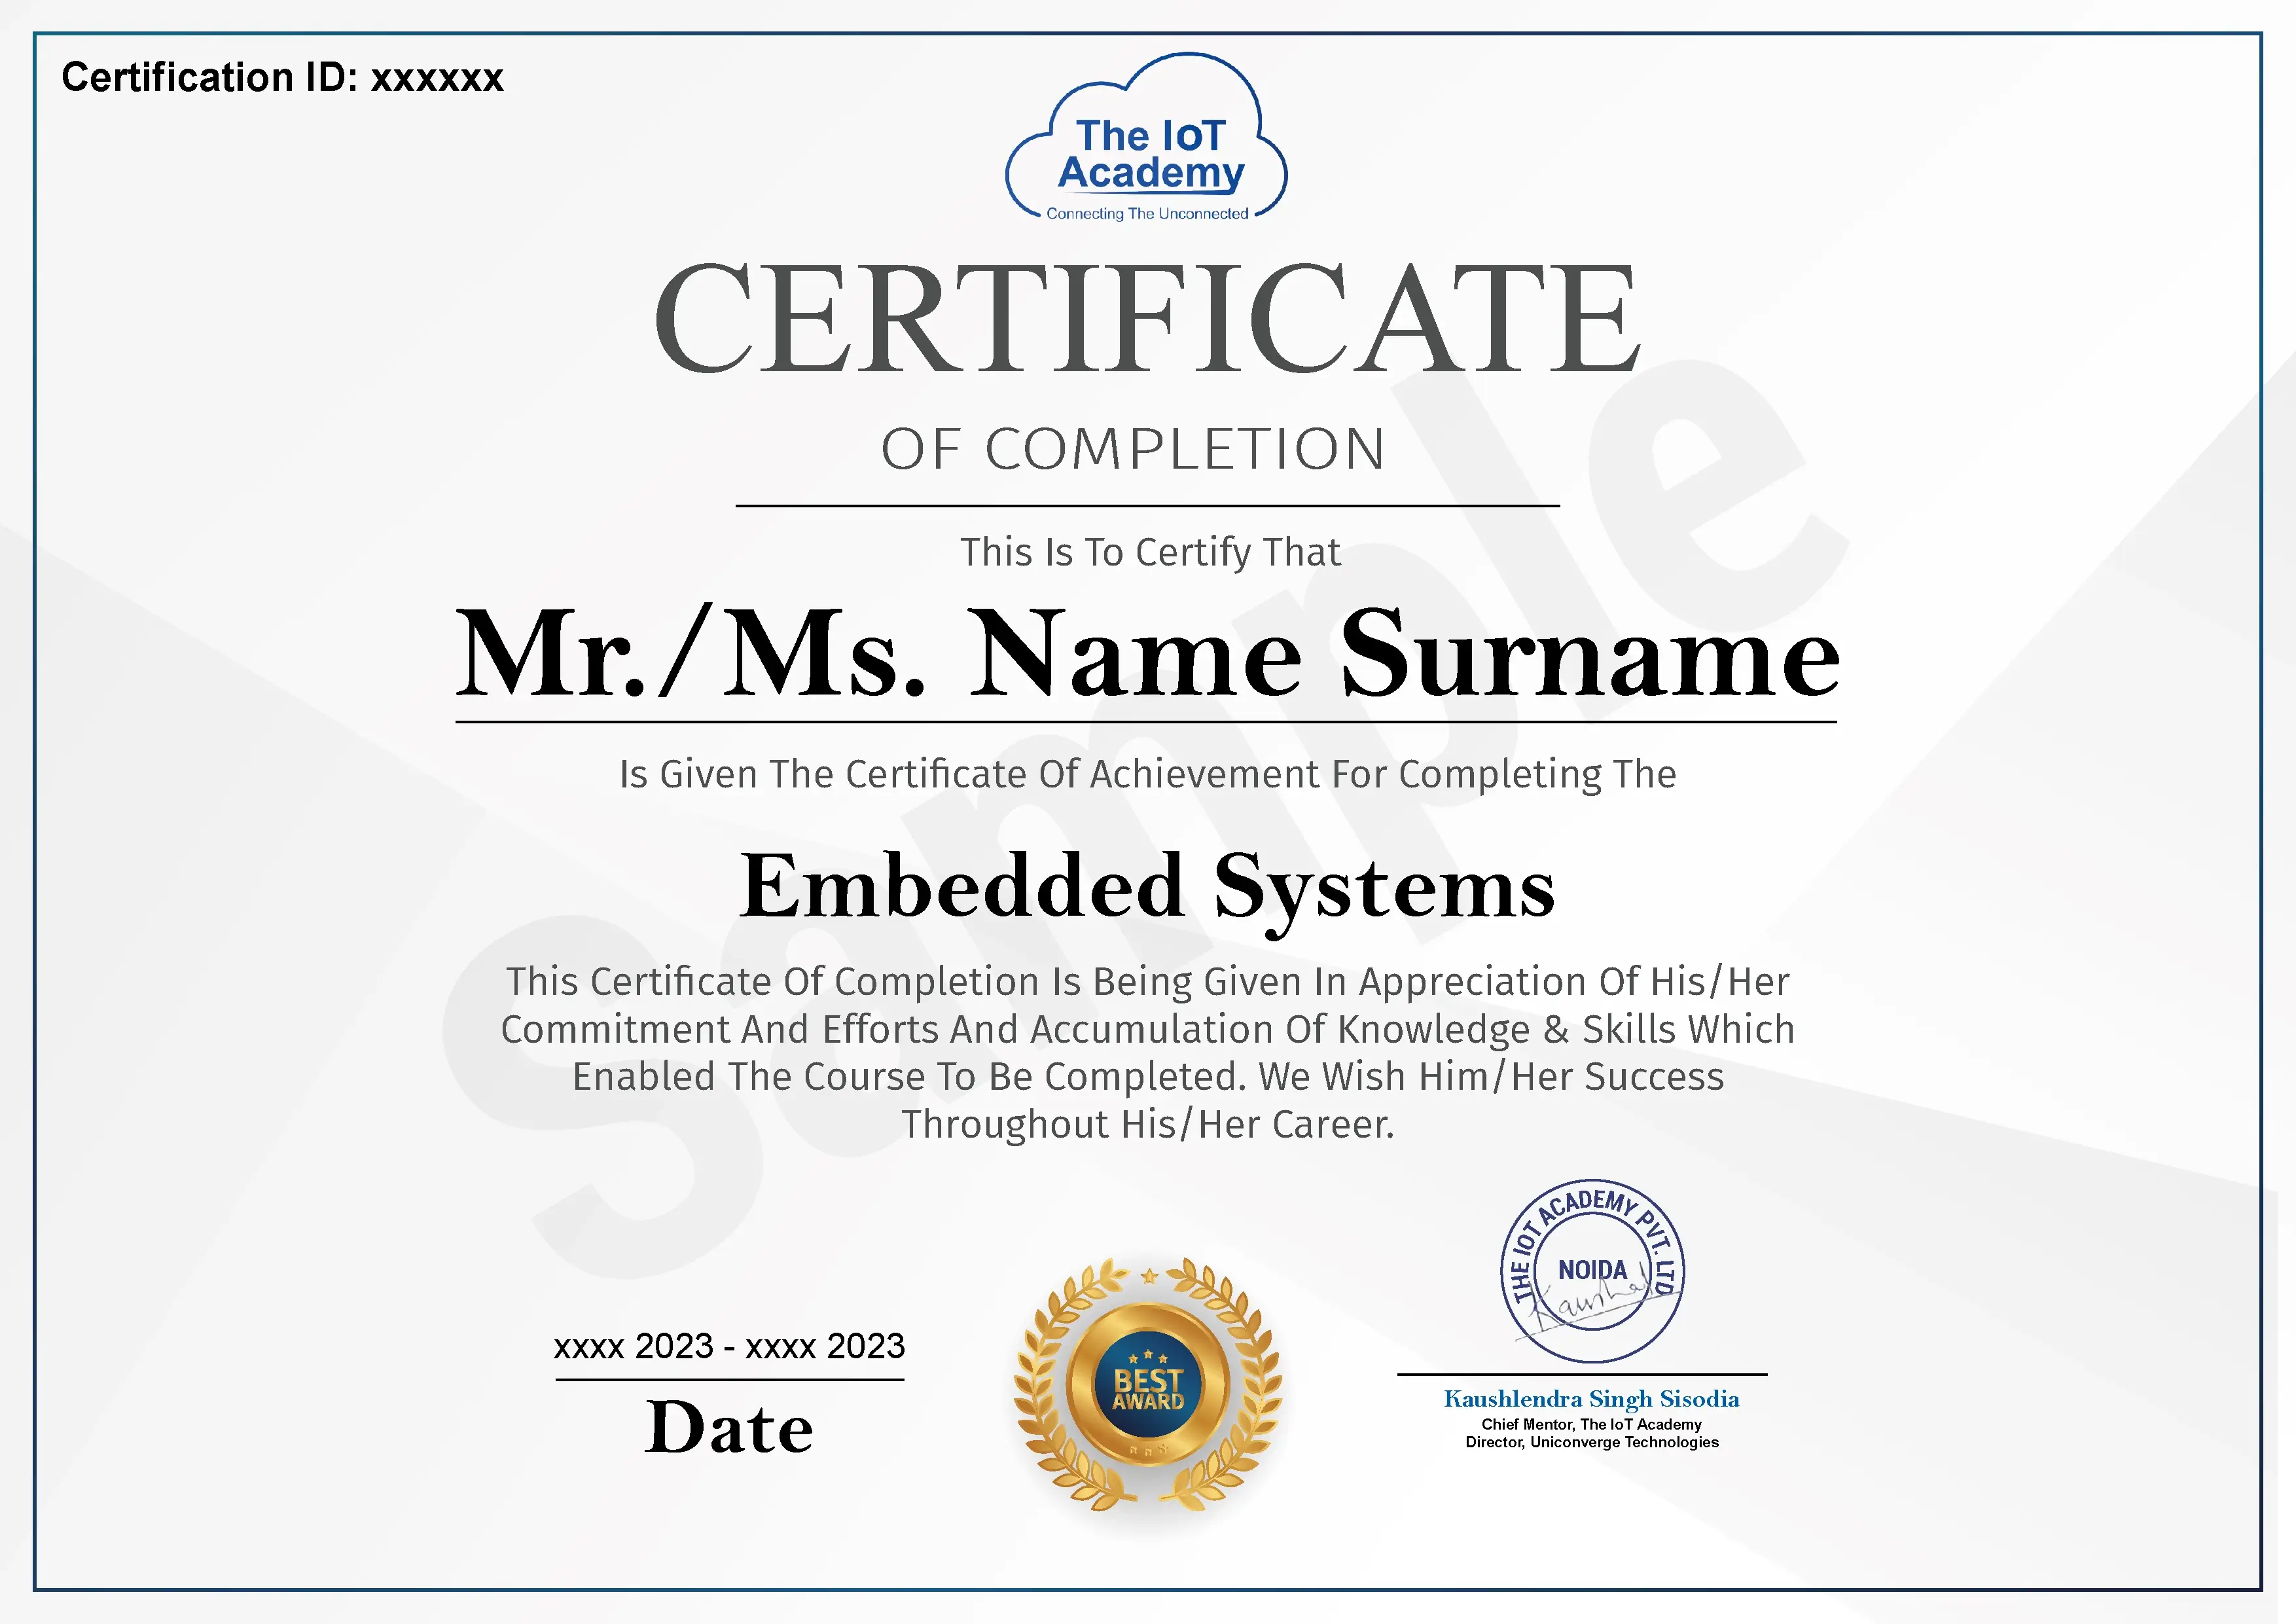 Embedded Systems certificate